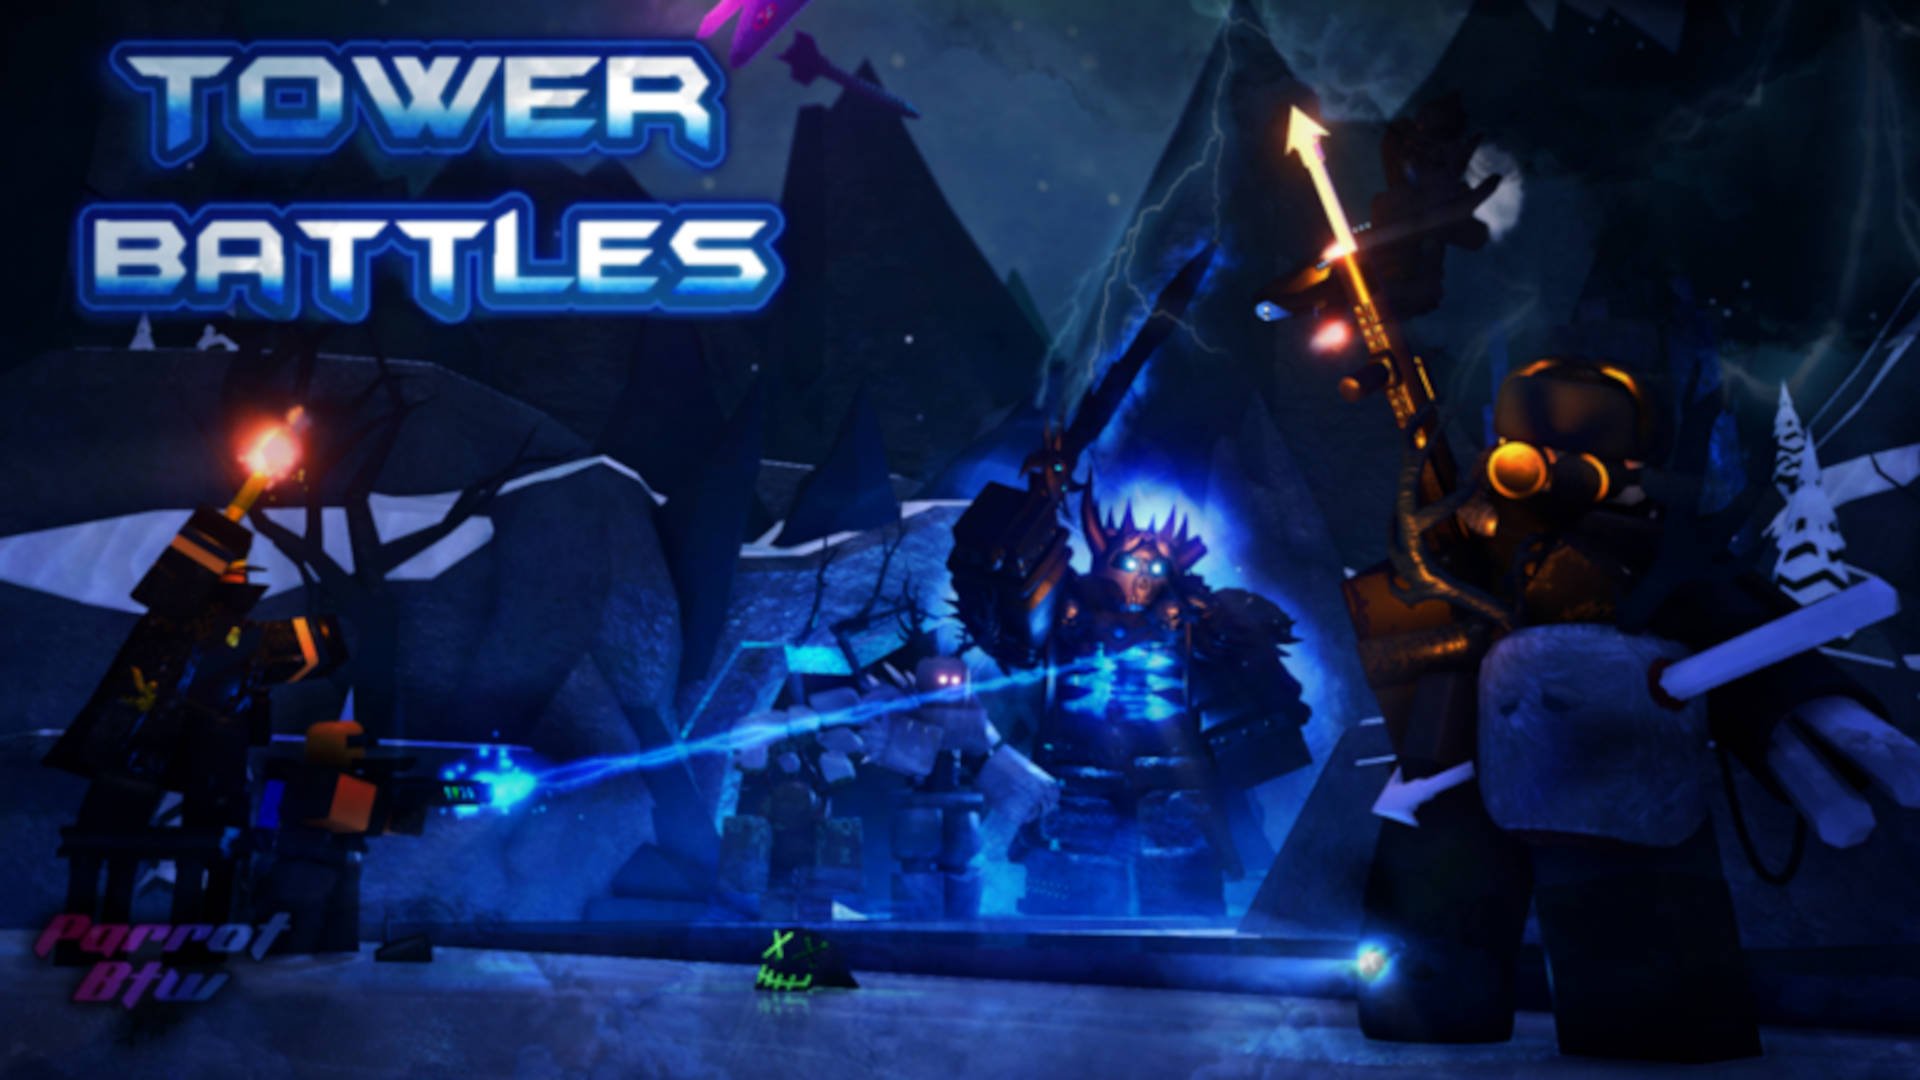 A combat scene from Tower Battles.